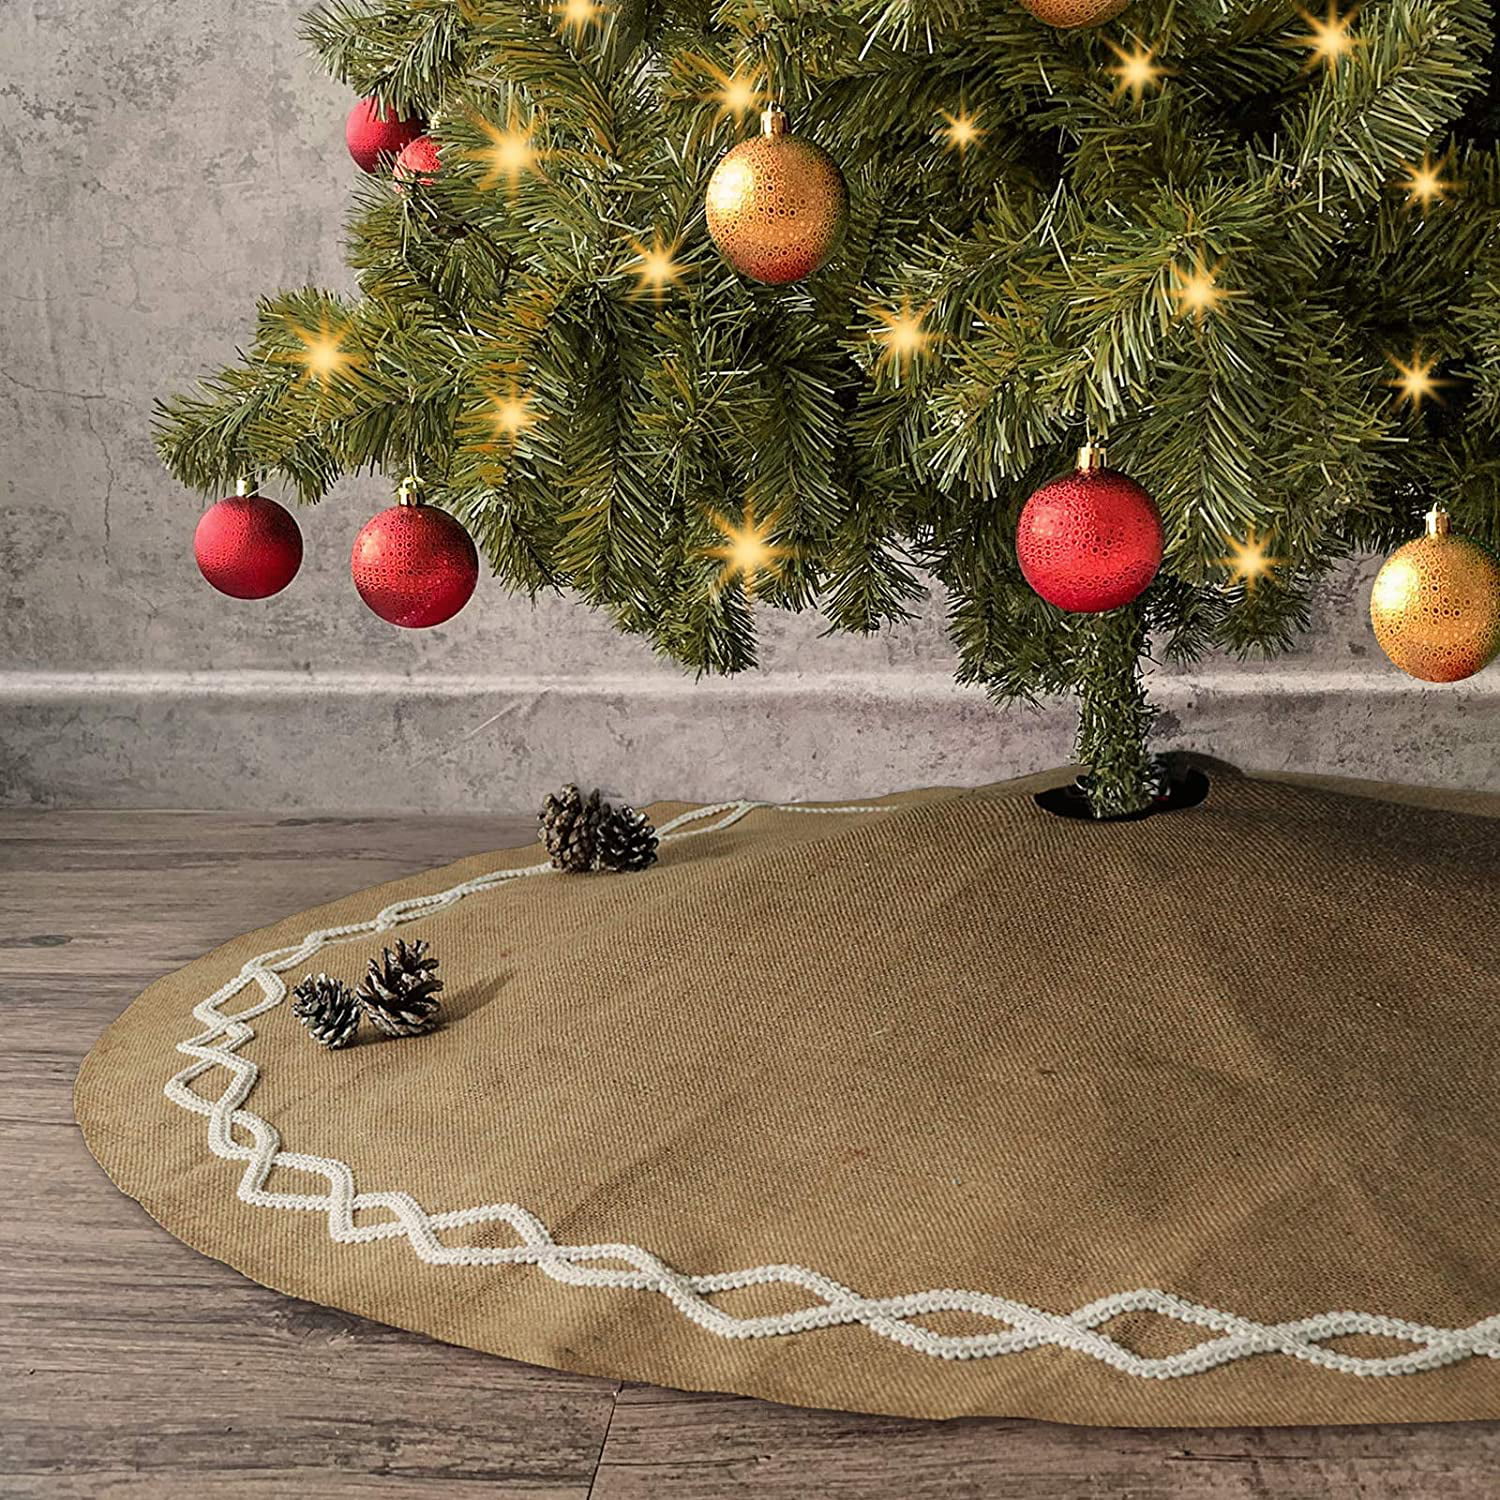 Snowy Landscape Winter Tree Stand Mat for All Occasions New Year Supplies Holiday Party Decorations Ornaments Cute Snowman Christmas Christmas Xmas Tree Mat Skirt Waterproof